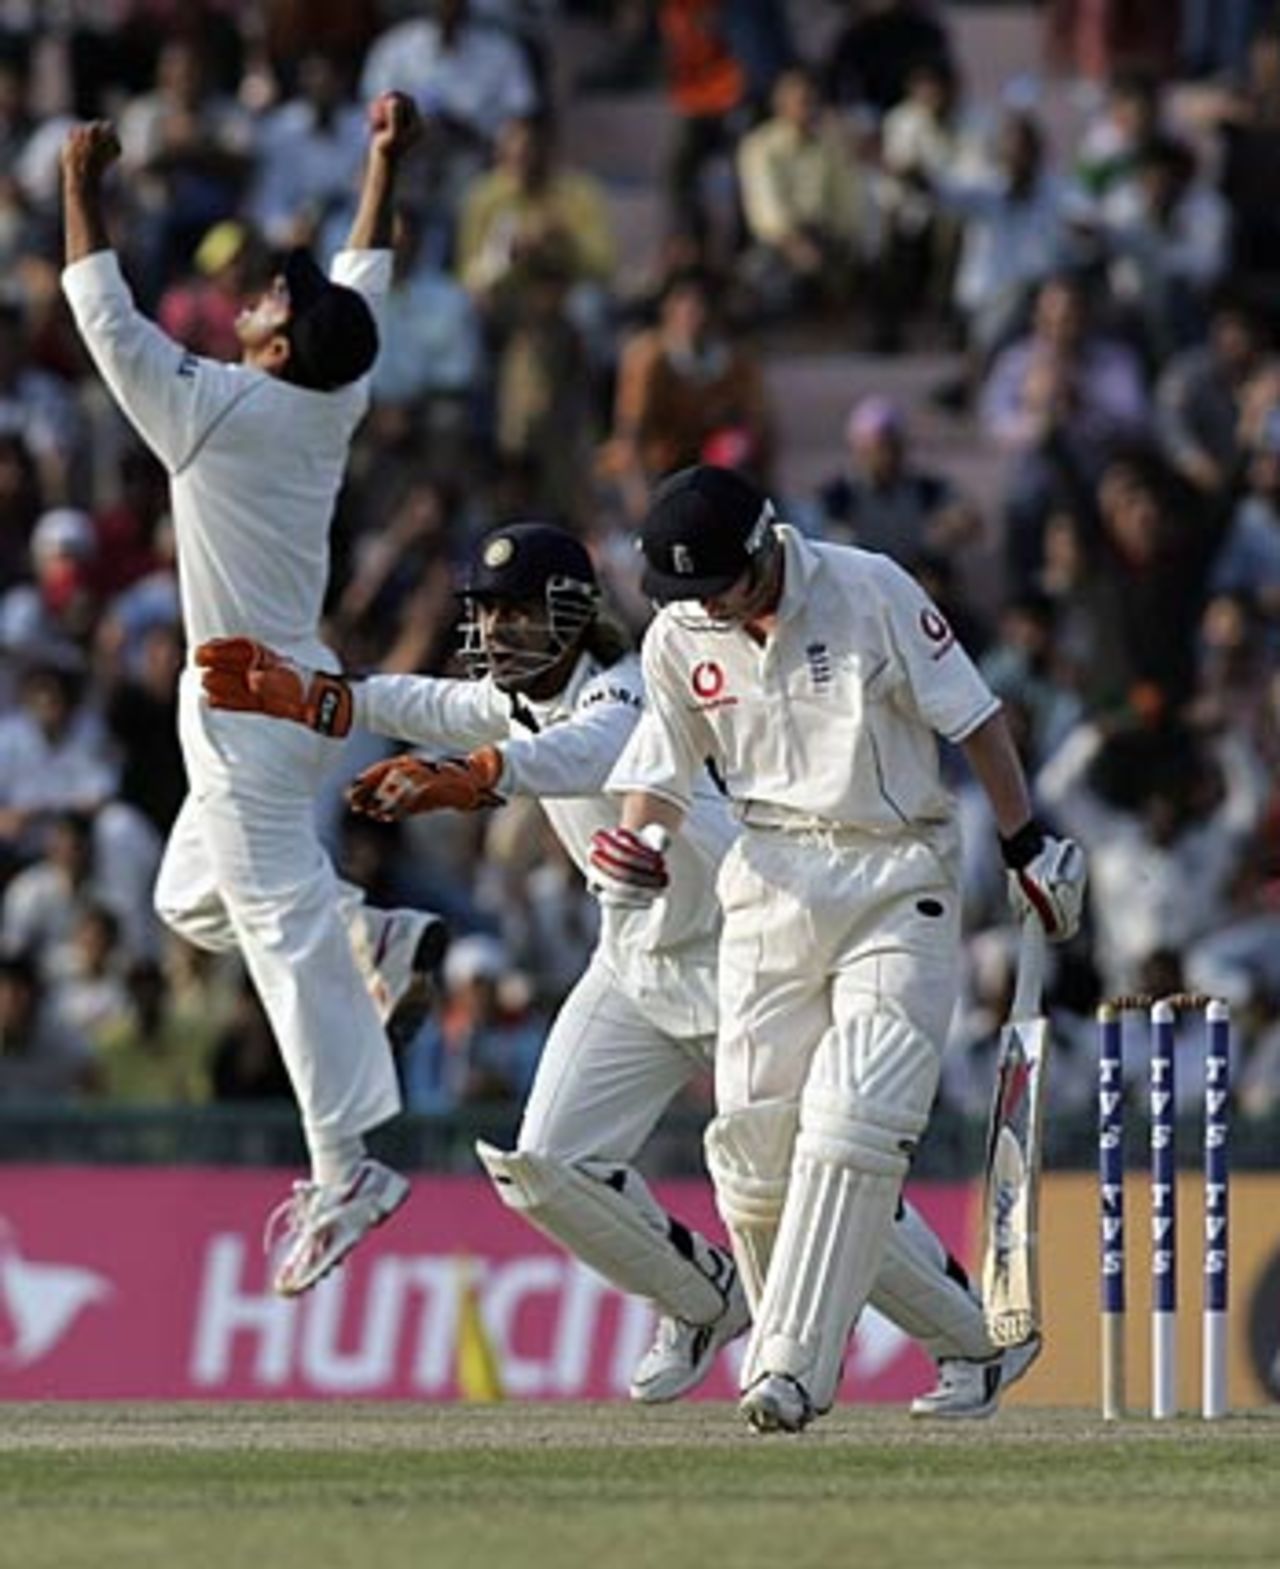 Rahul Dravid catches Paul Collingwood as England struggle in the final session of the fourth day, India v England, 2nd Test, Mohali, March 12, 2006